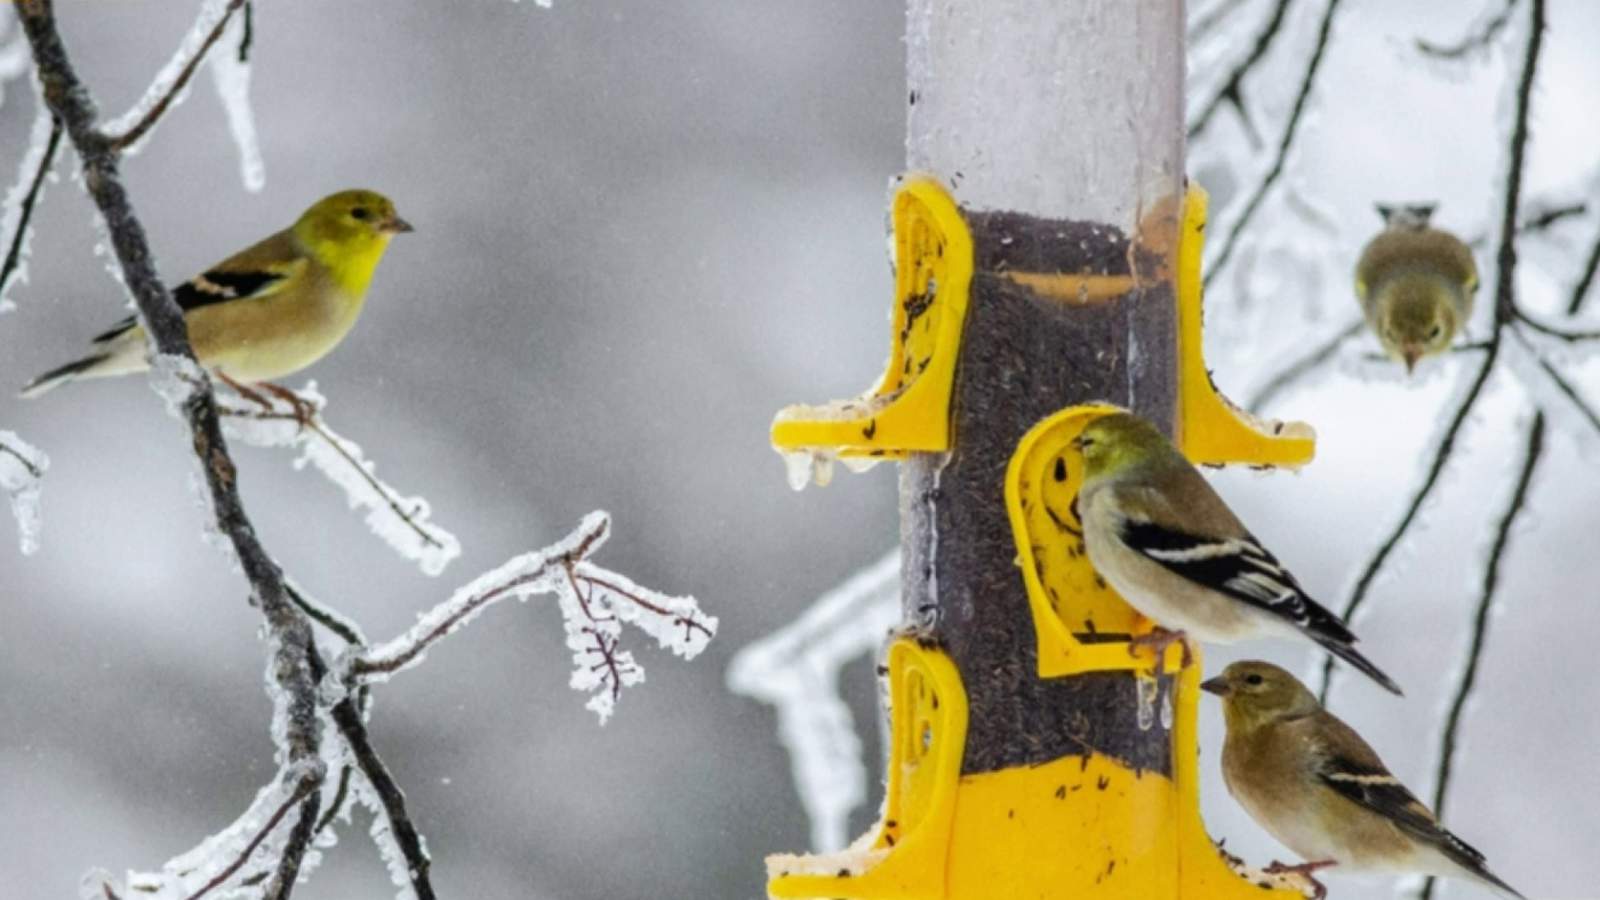 This is your chance to catch rare sightings of winter wildlife in Michigan